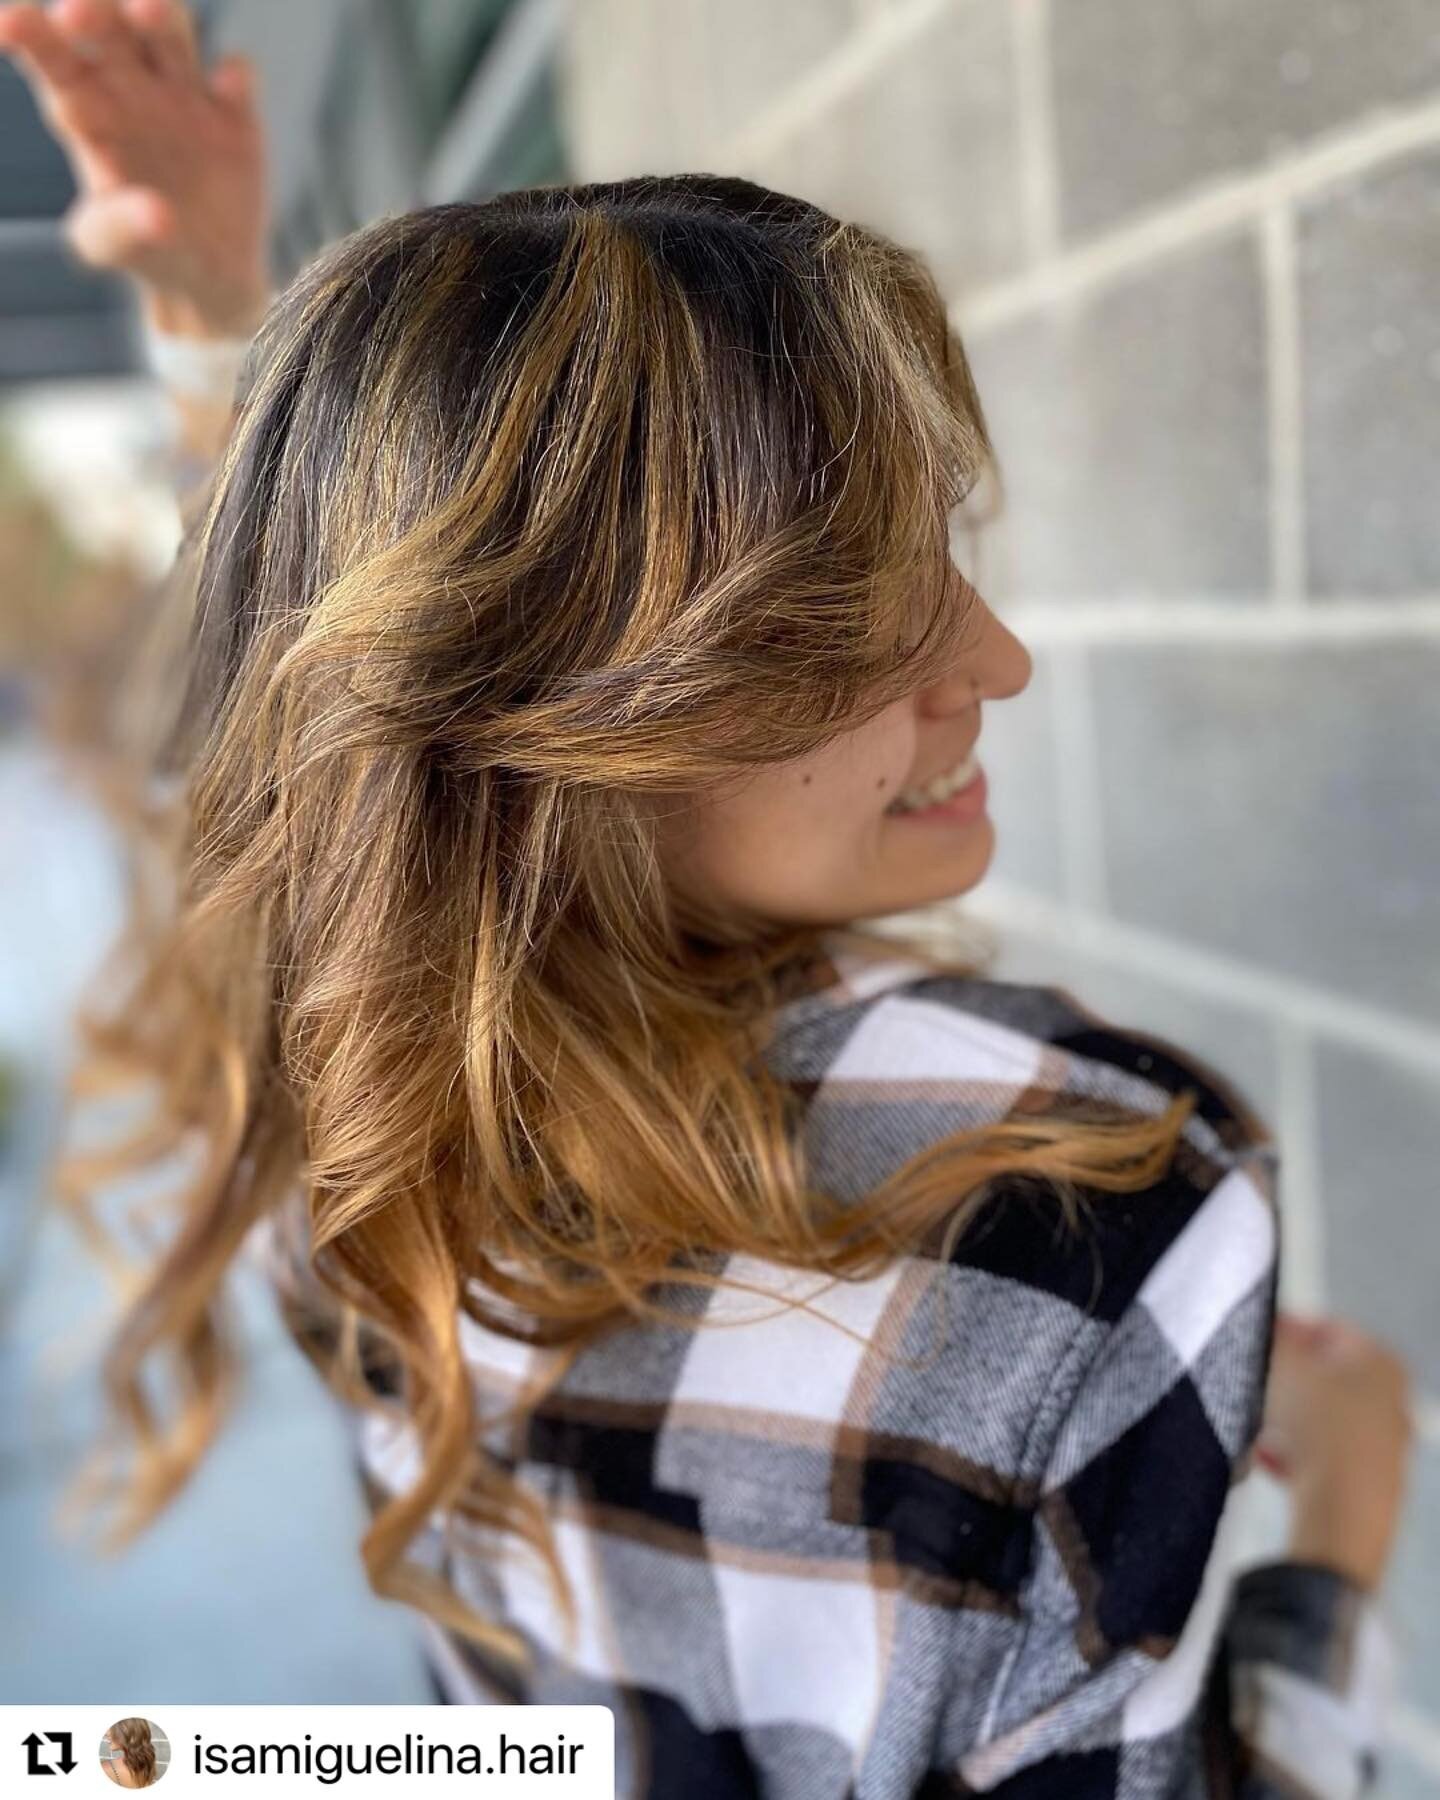 #Repost @isamiguelina.hair 
・・・
she&rsquo;s a vision 🤩
.
.
.
.
.

#tampa #tampahairstylist #balayge #bombshell #blonding #colorist #paulmitchell #haircut #pmcolor #positivity #natural #luxary #girly #bombshell #designerhair #vegan #vegansalon #halfh